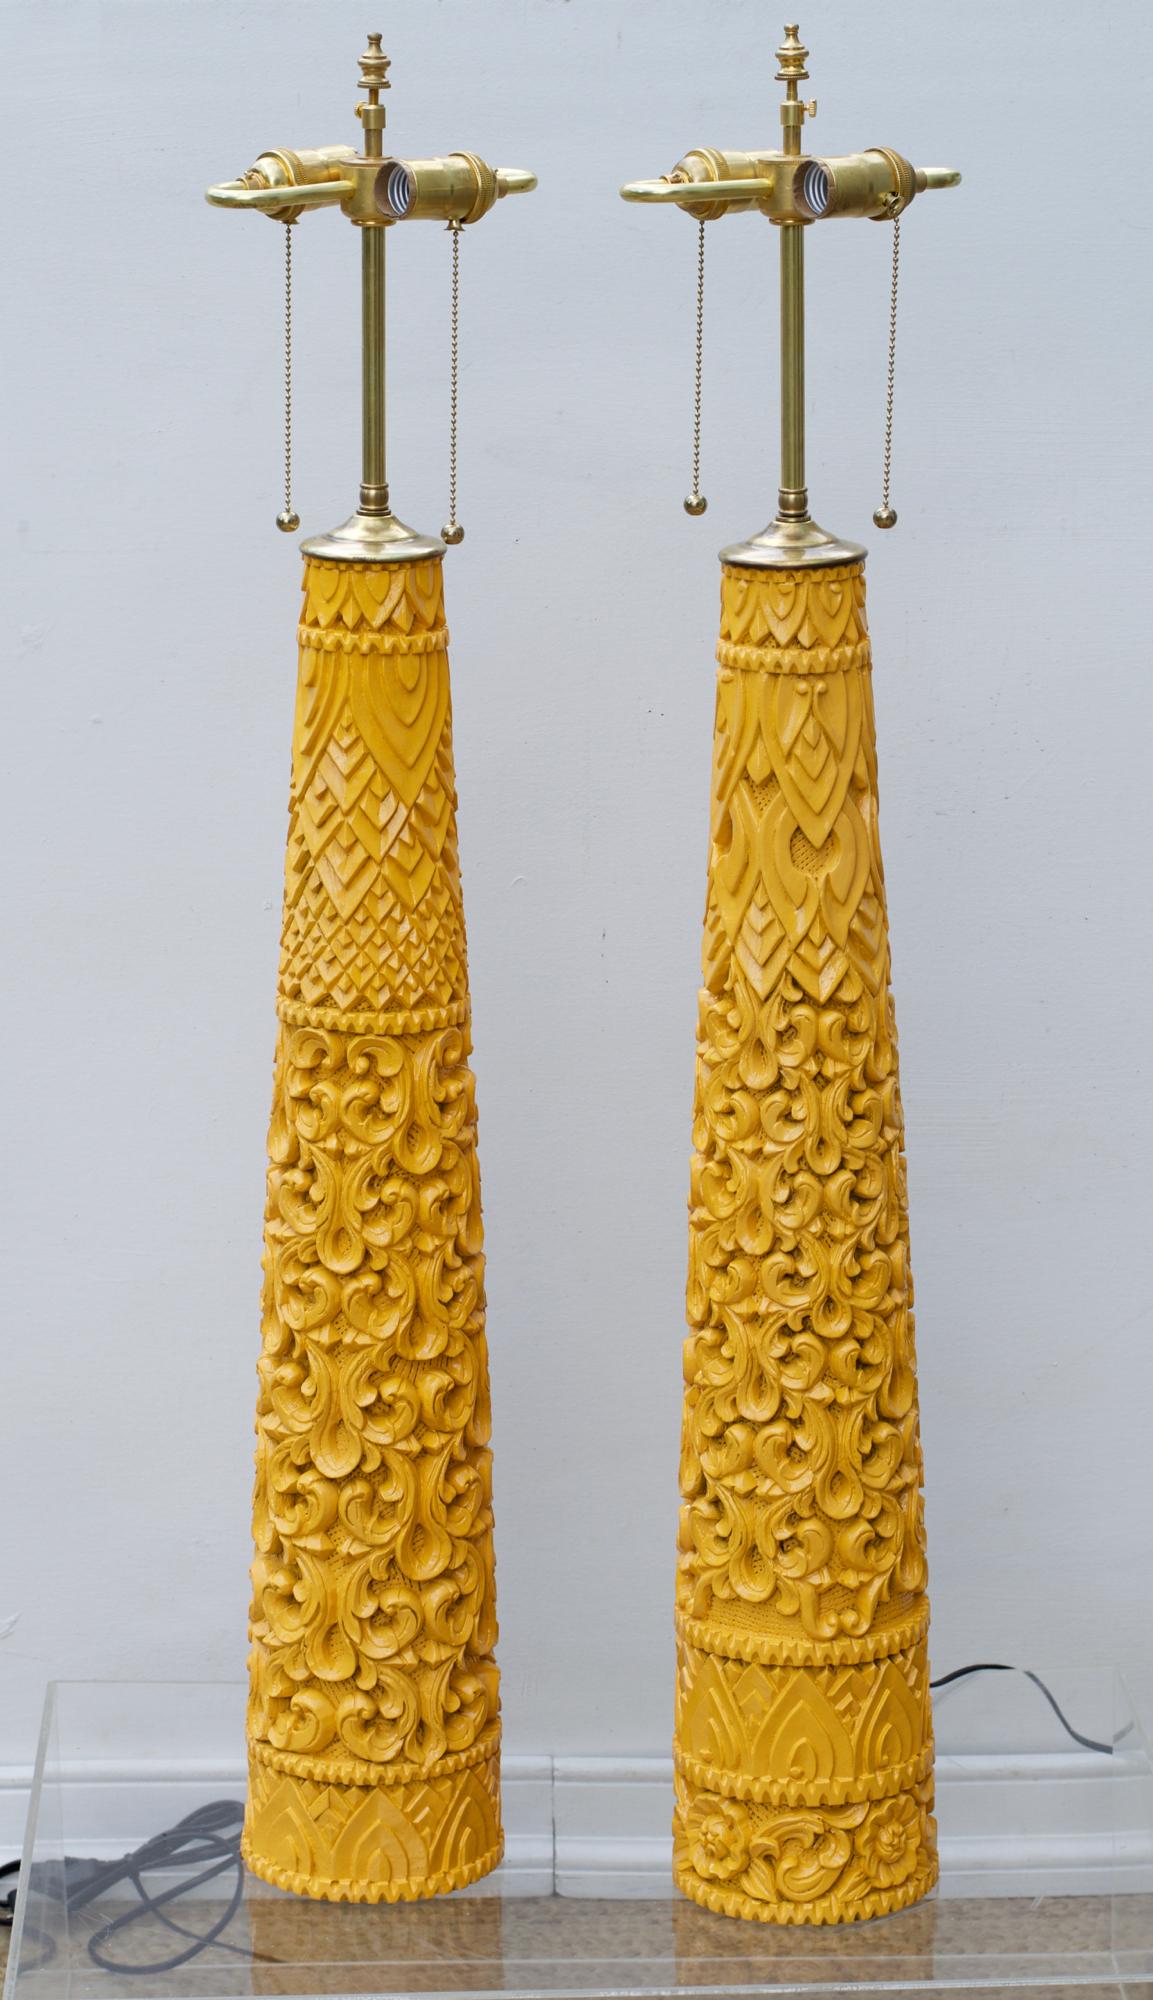 A near pair of slender and tapering carved wood lamps in an electrifying marigold yellow spray. The 1970s vintage cylinders are most likely Indian and will bring the Boho / Global vibe to any space in which they are employed.